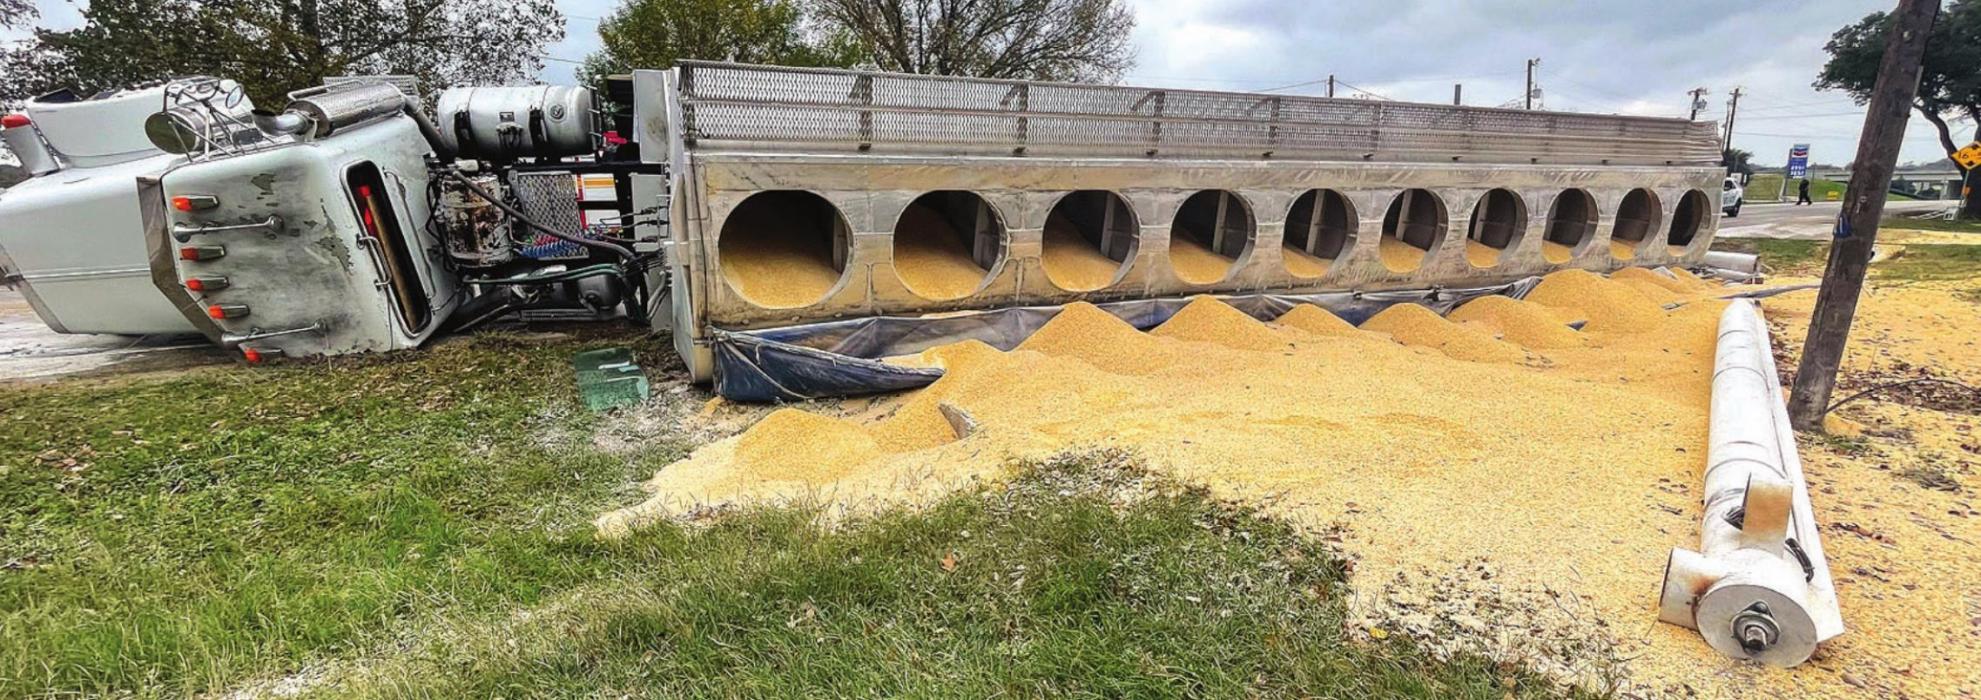 Pictured above is the load of cracked corn that spilled from the trailer of an 18-wheeler that rolled over on SH 159 Friday. Photo by Andy Behlen